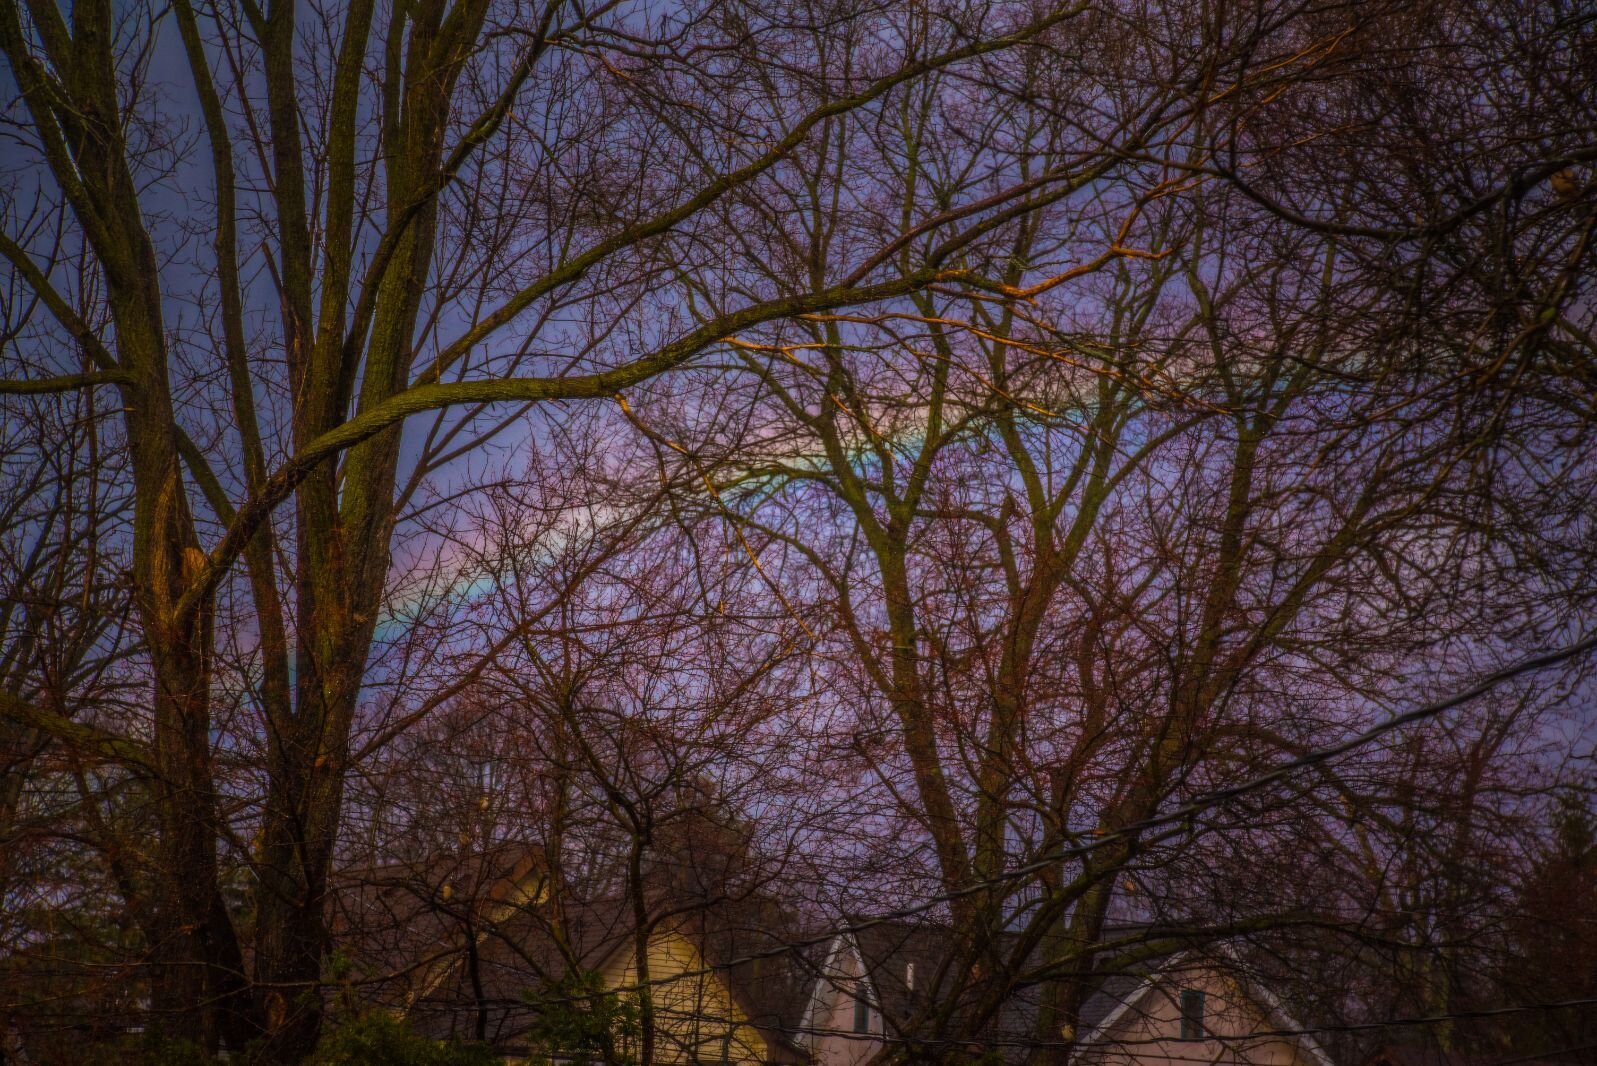 As the neighborhood seeks out ways to control illegal dumping a rainbow forms over the Edison Neighborhood.